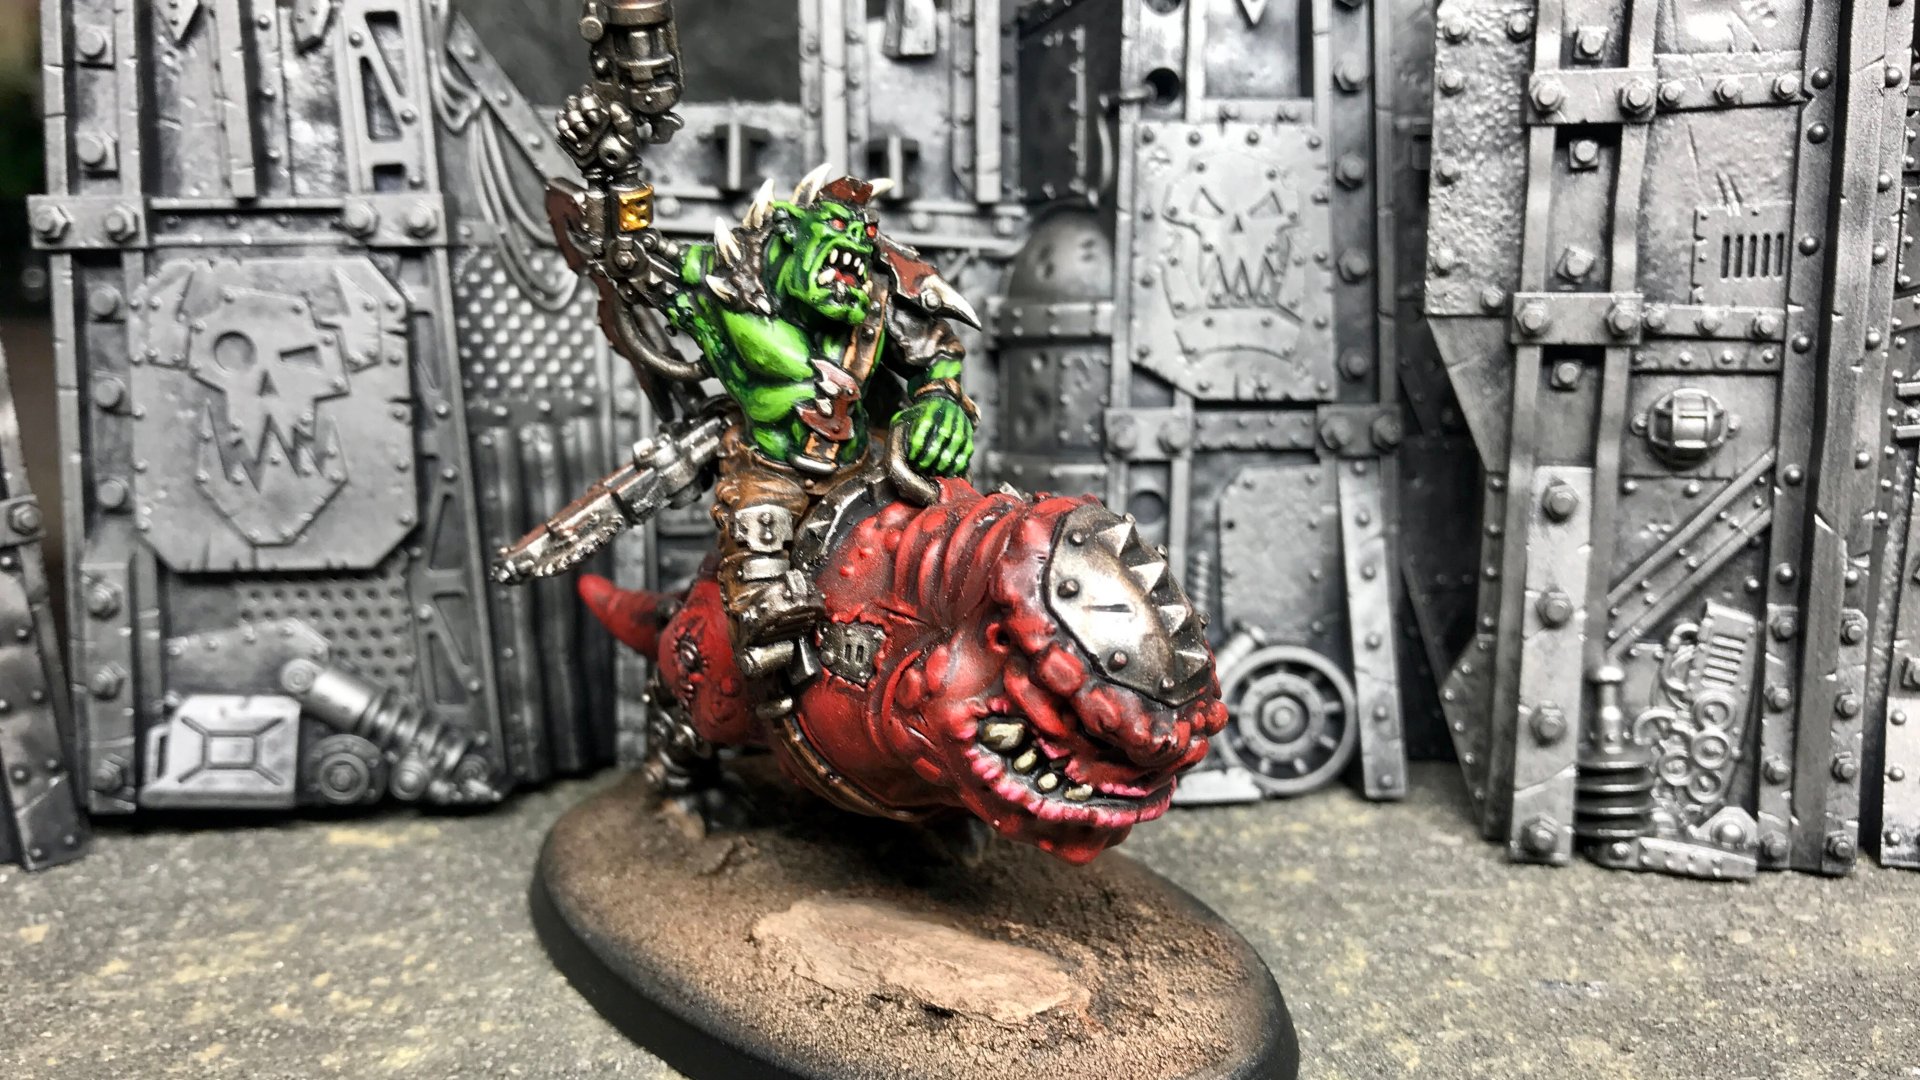 Warhammer 40k orks army guide - Photo by Chris James showing an On Orks Nob on smasha squig model